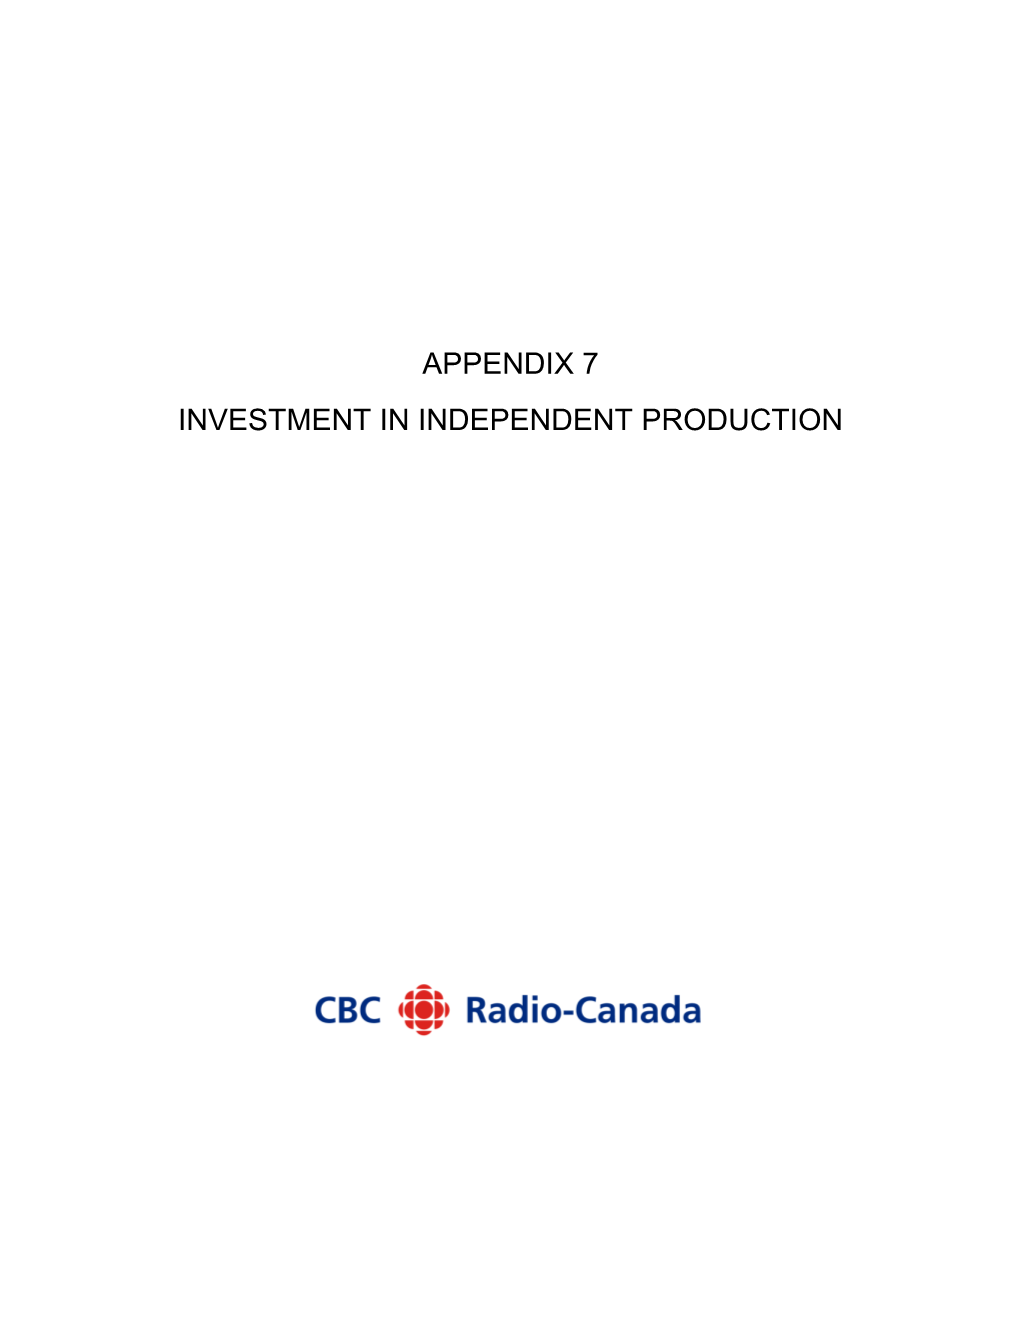 Appendix 7 Investment in Independent Production